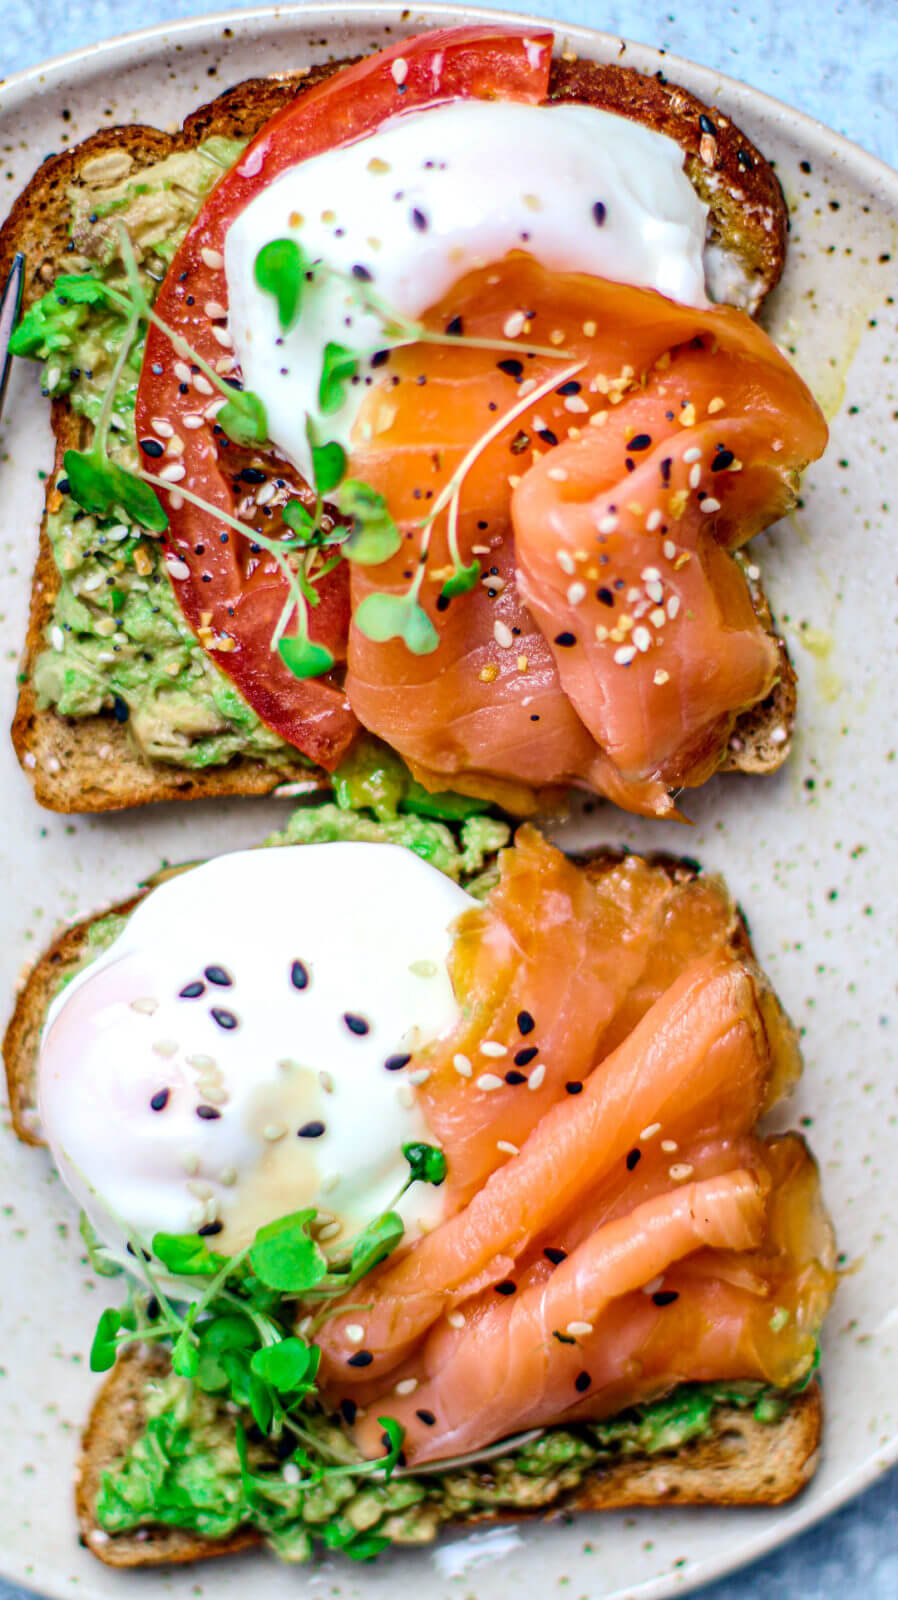 Smoked Salmon + Poached Eggs on Toast via Killing Thyme. Healthy, easy, and incredibly delicious salmon recipes you'll want to eat over and over again for breakfast,  lunch, or dinner! Find baked salmon, grilled salmon, smoked, pan-seared, and more!